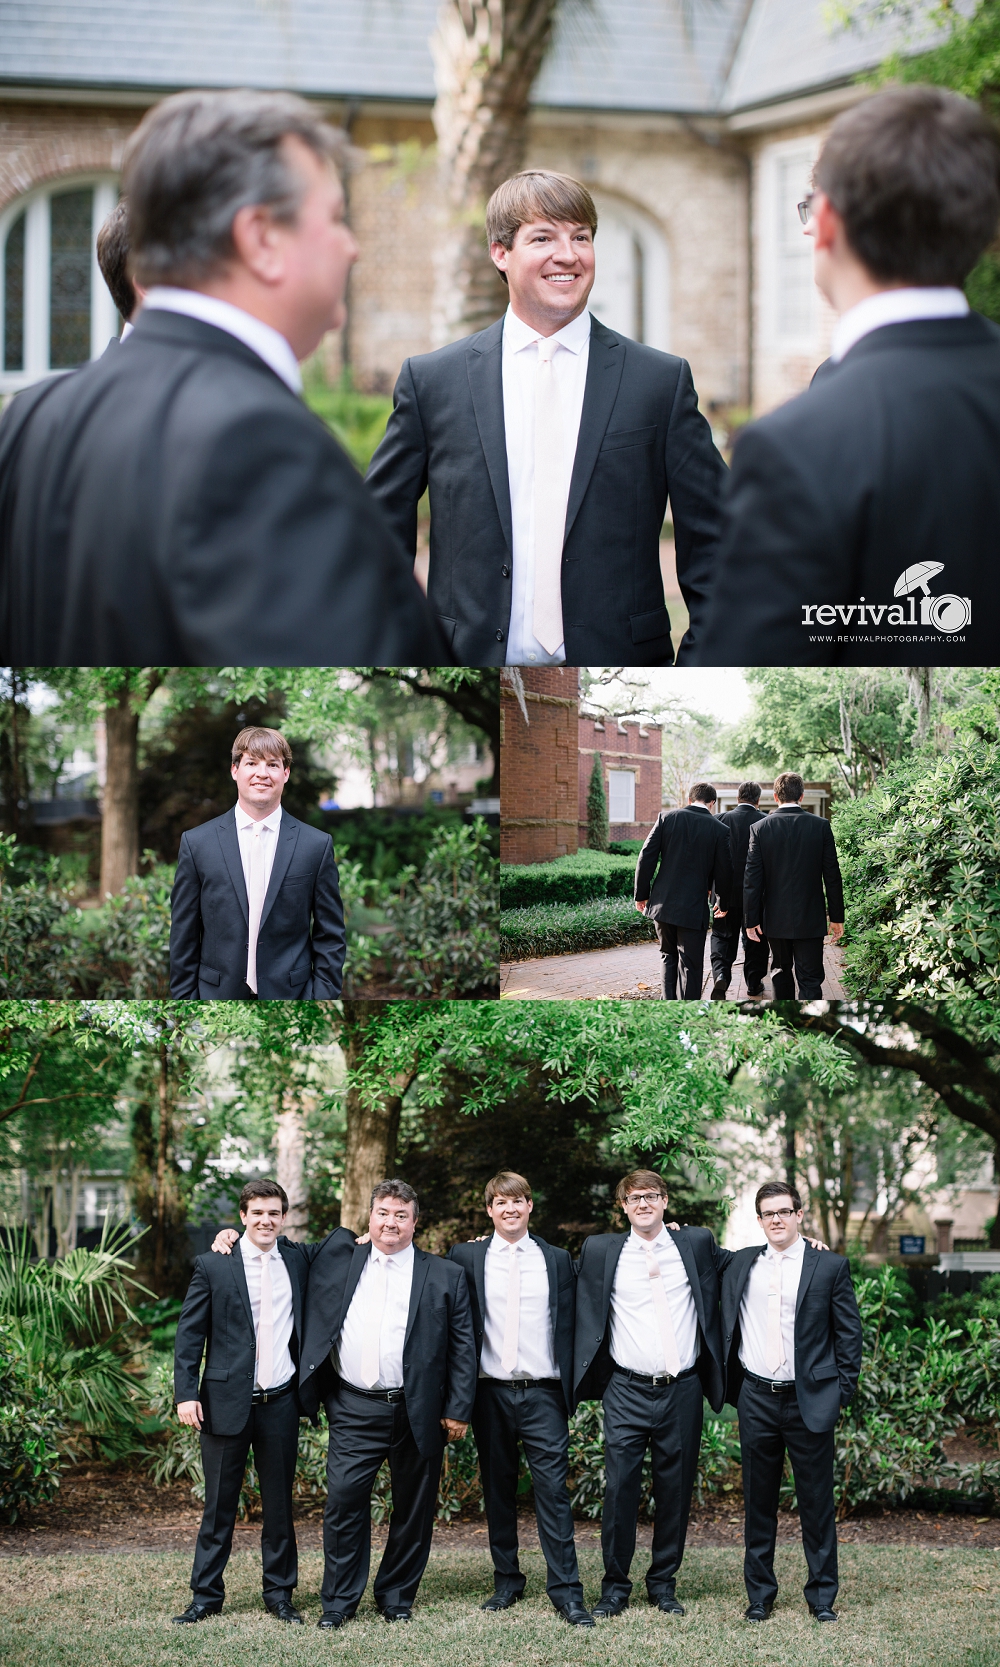 Emily + Chris: A Wedding at The Wickliffe House in the Heart of Charleston Photography by Revival Photography Fine Art Destination Wedding Photographers www.revivalphotography.com